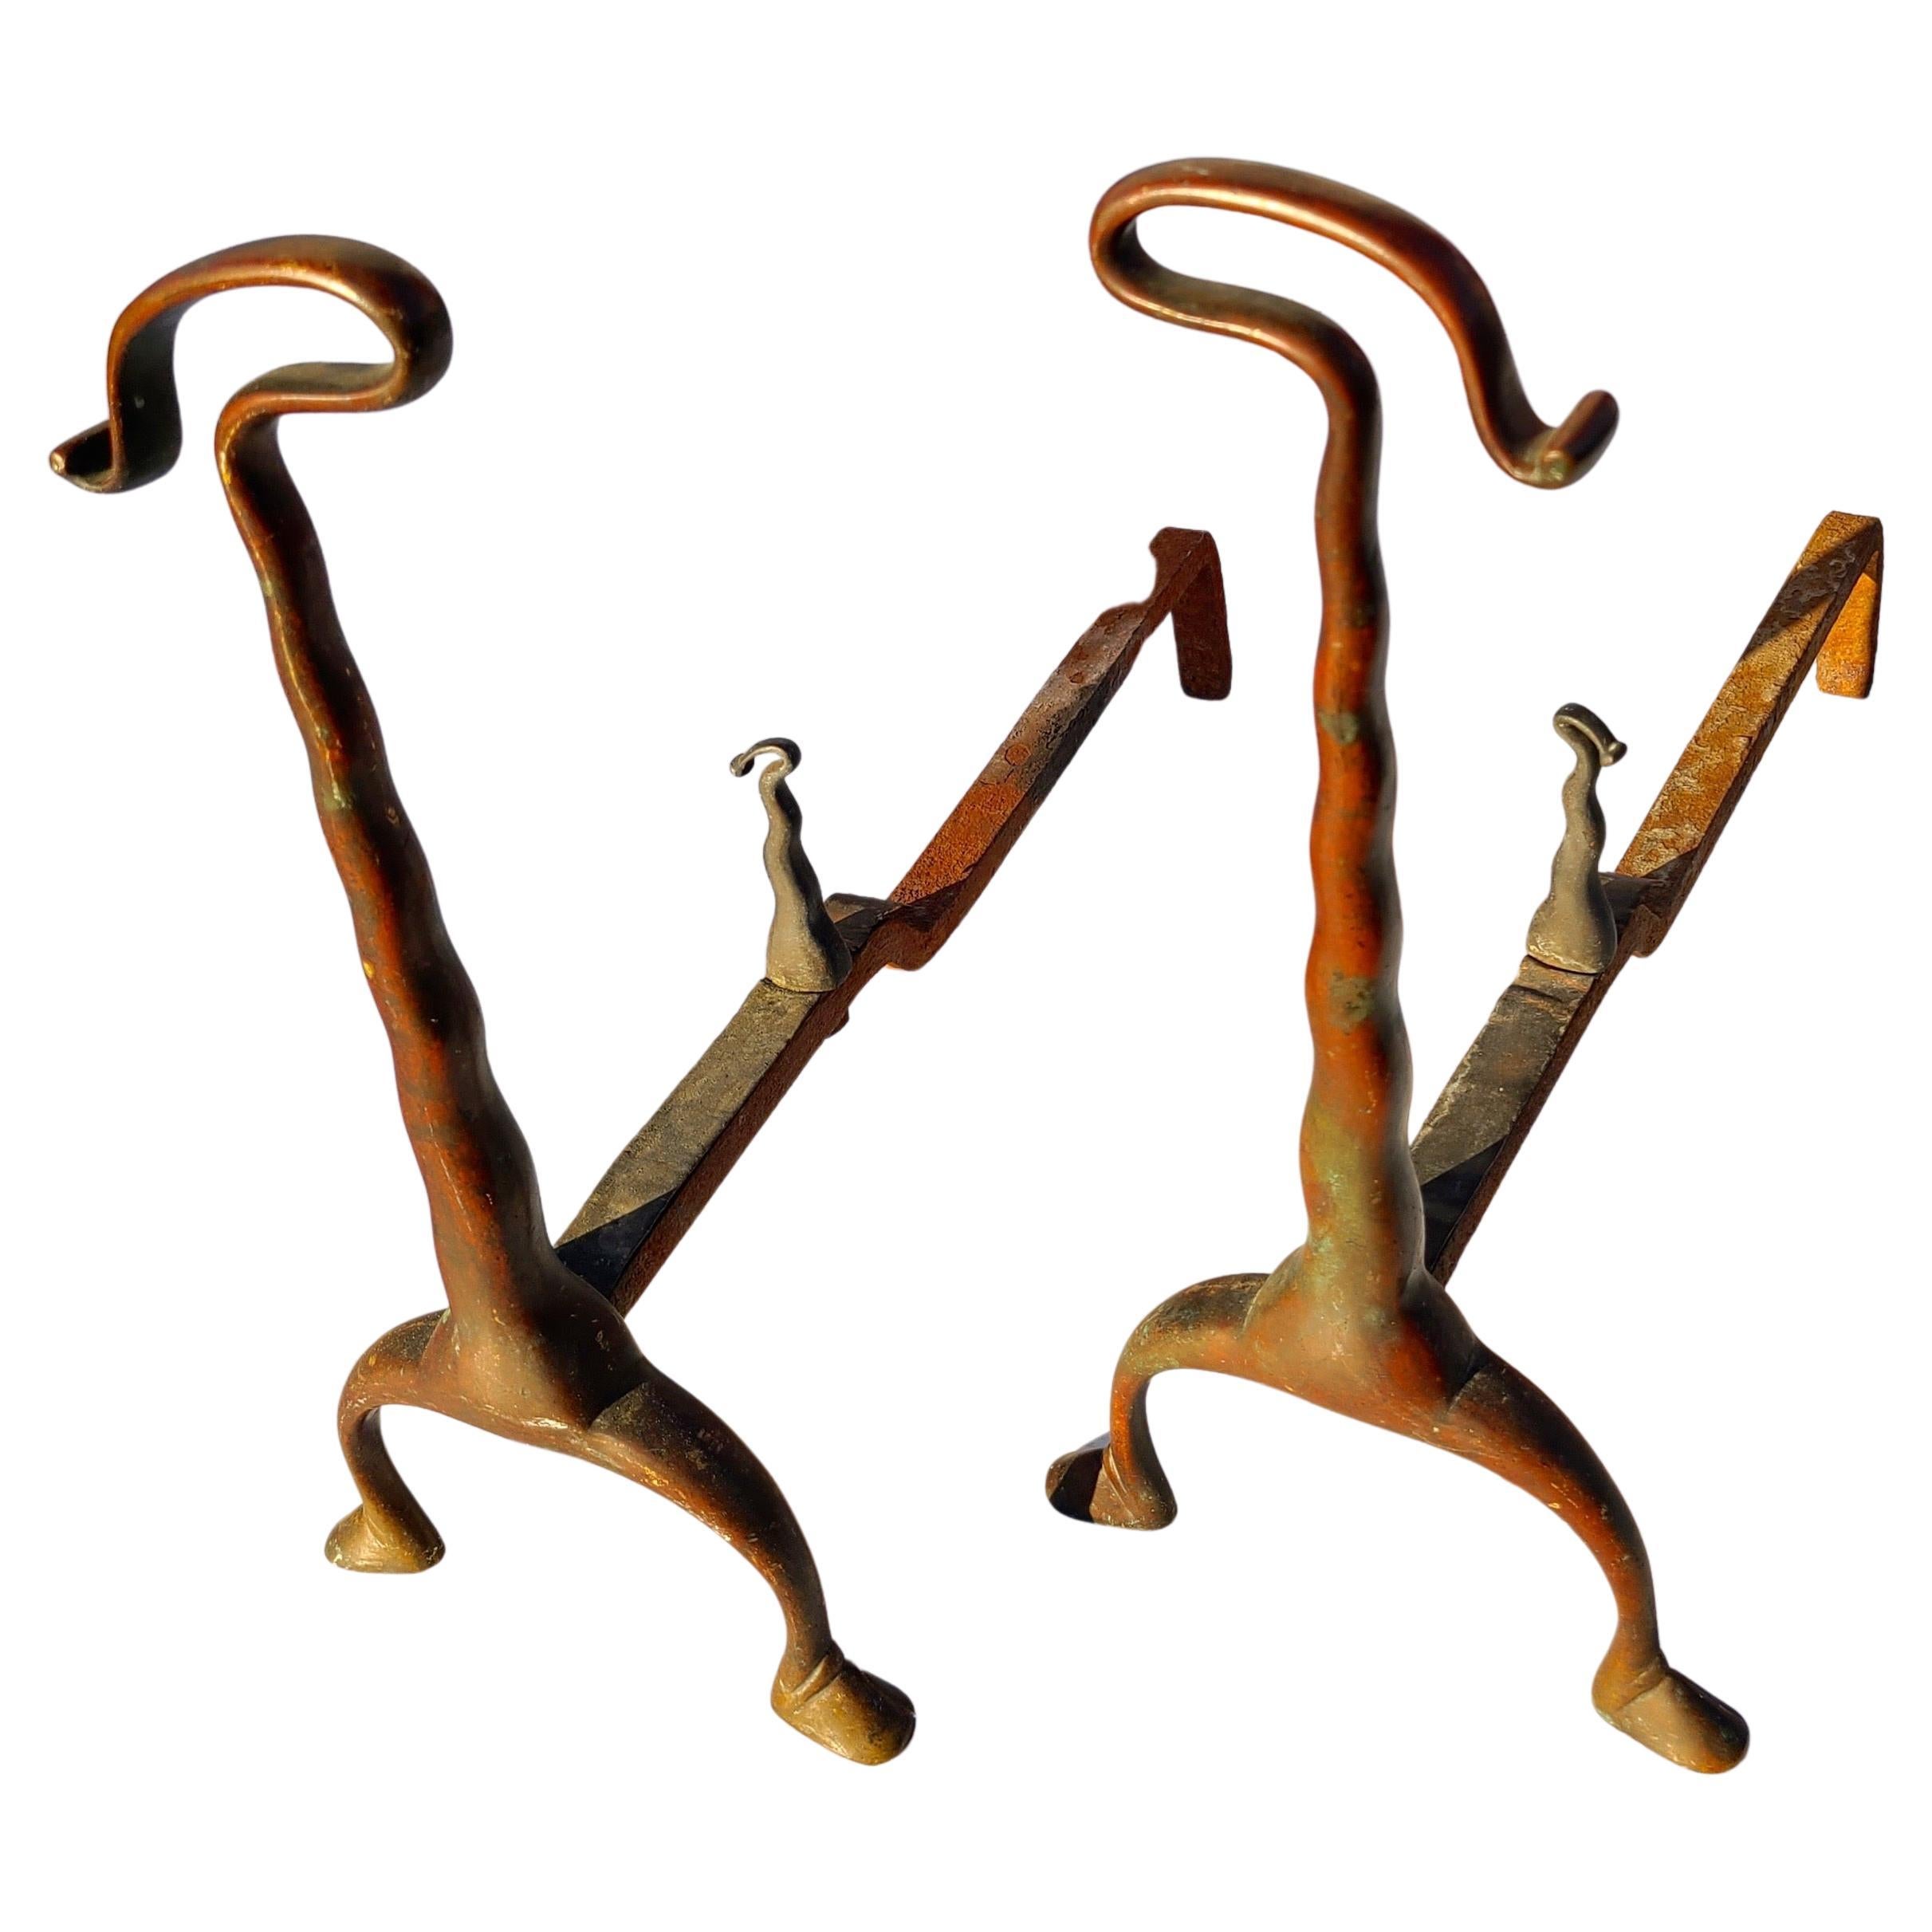 Please message us for a cost effective shipping quote to your location.

Pair bronze metal studio Andirons.